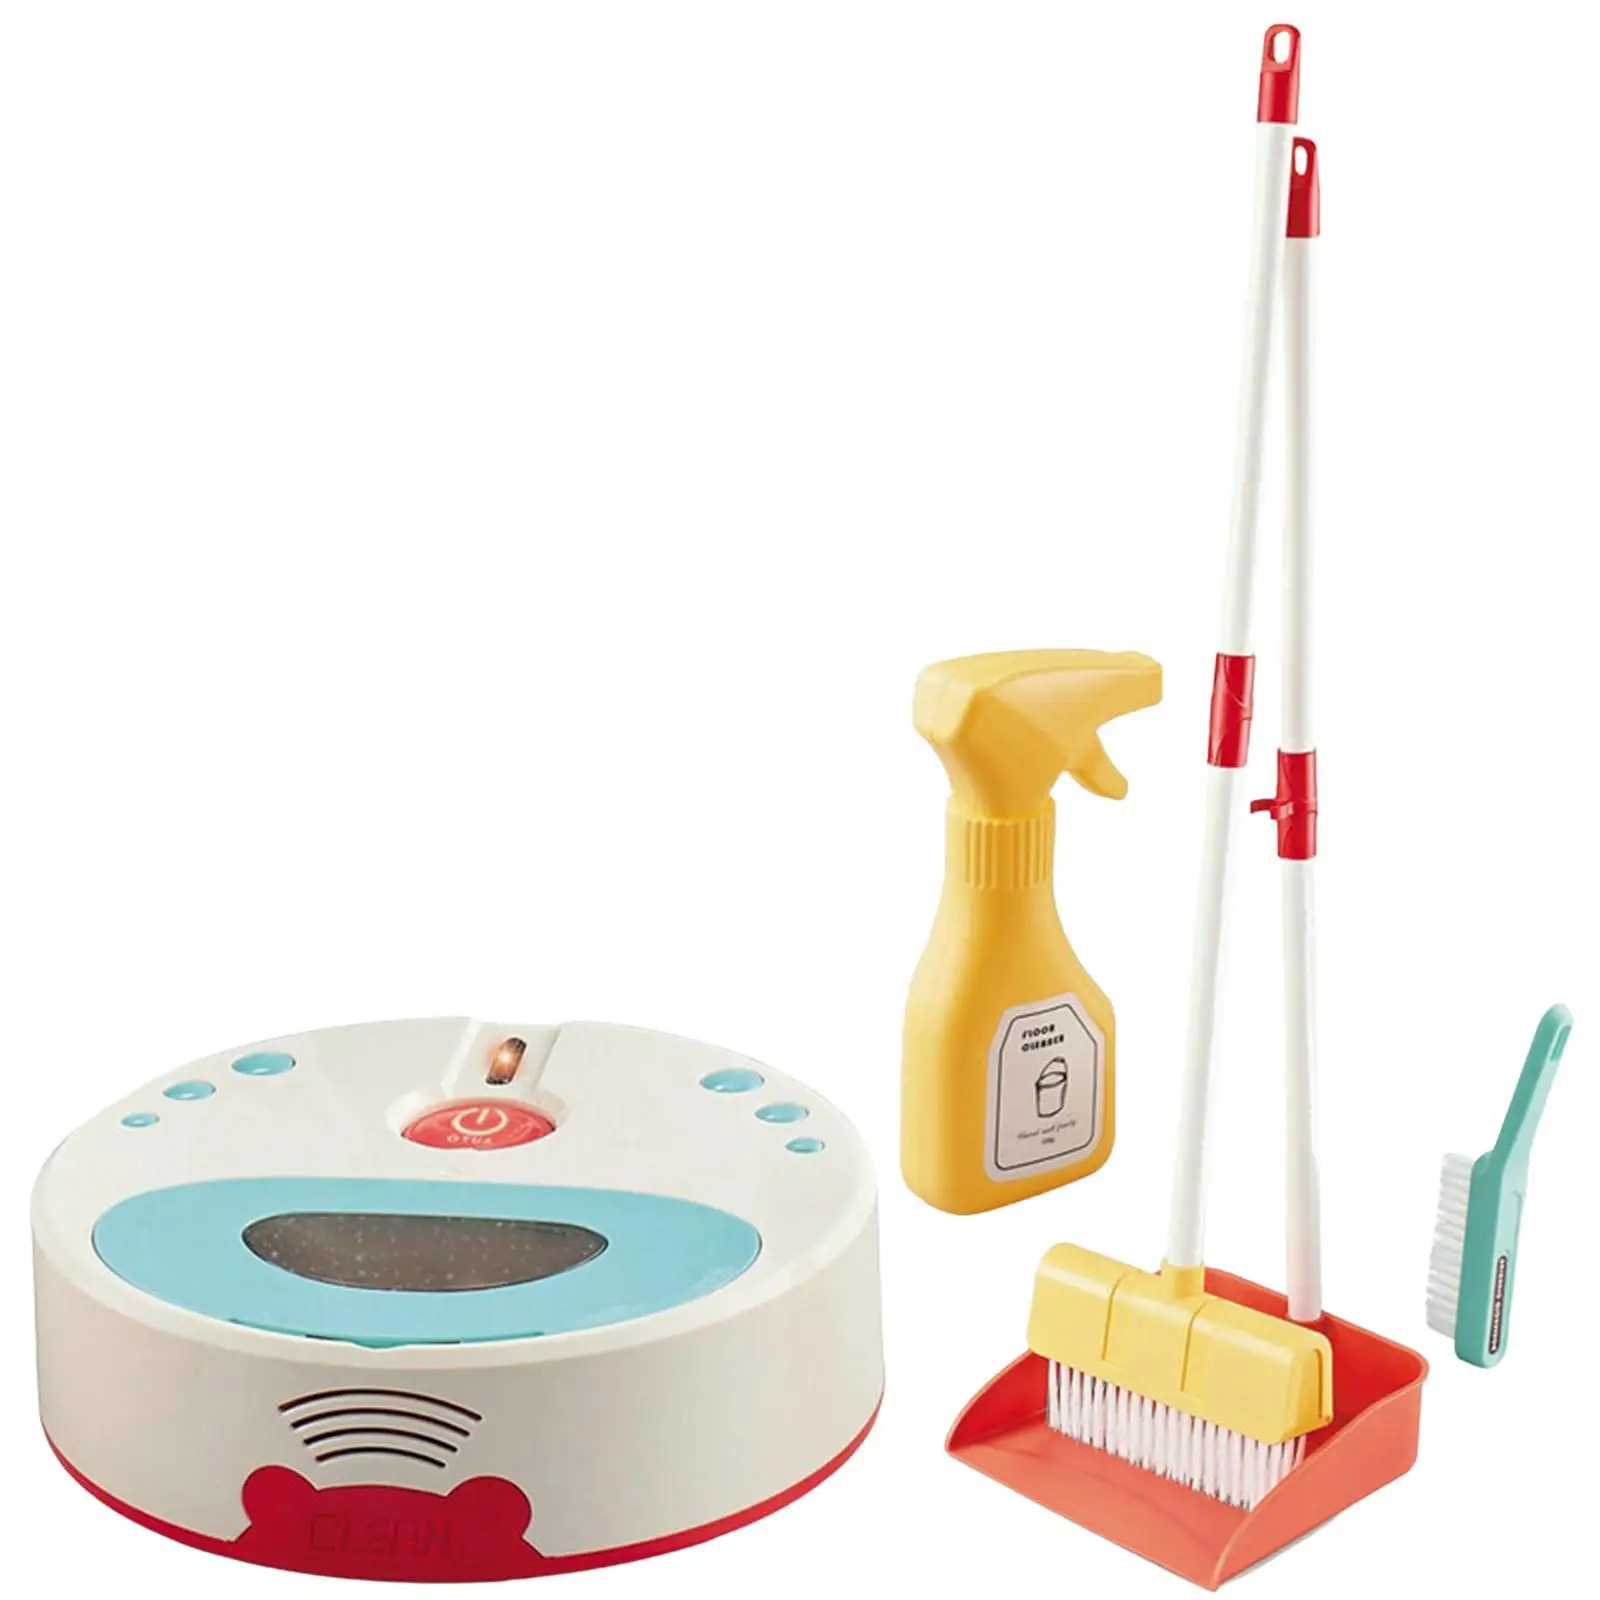 5 Pieces Kids Cleaning Tools Set Toy Role Play Game Simulation Sweeping Robot Toy Pretend Play House Cleaning Tools for Children